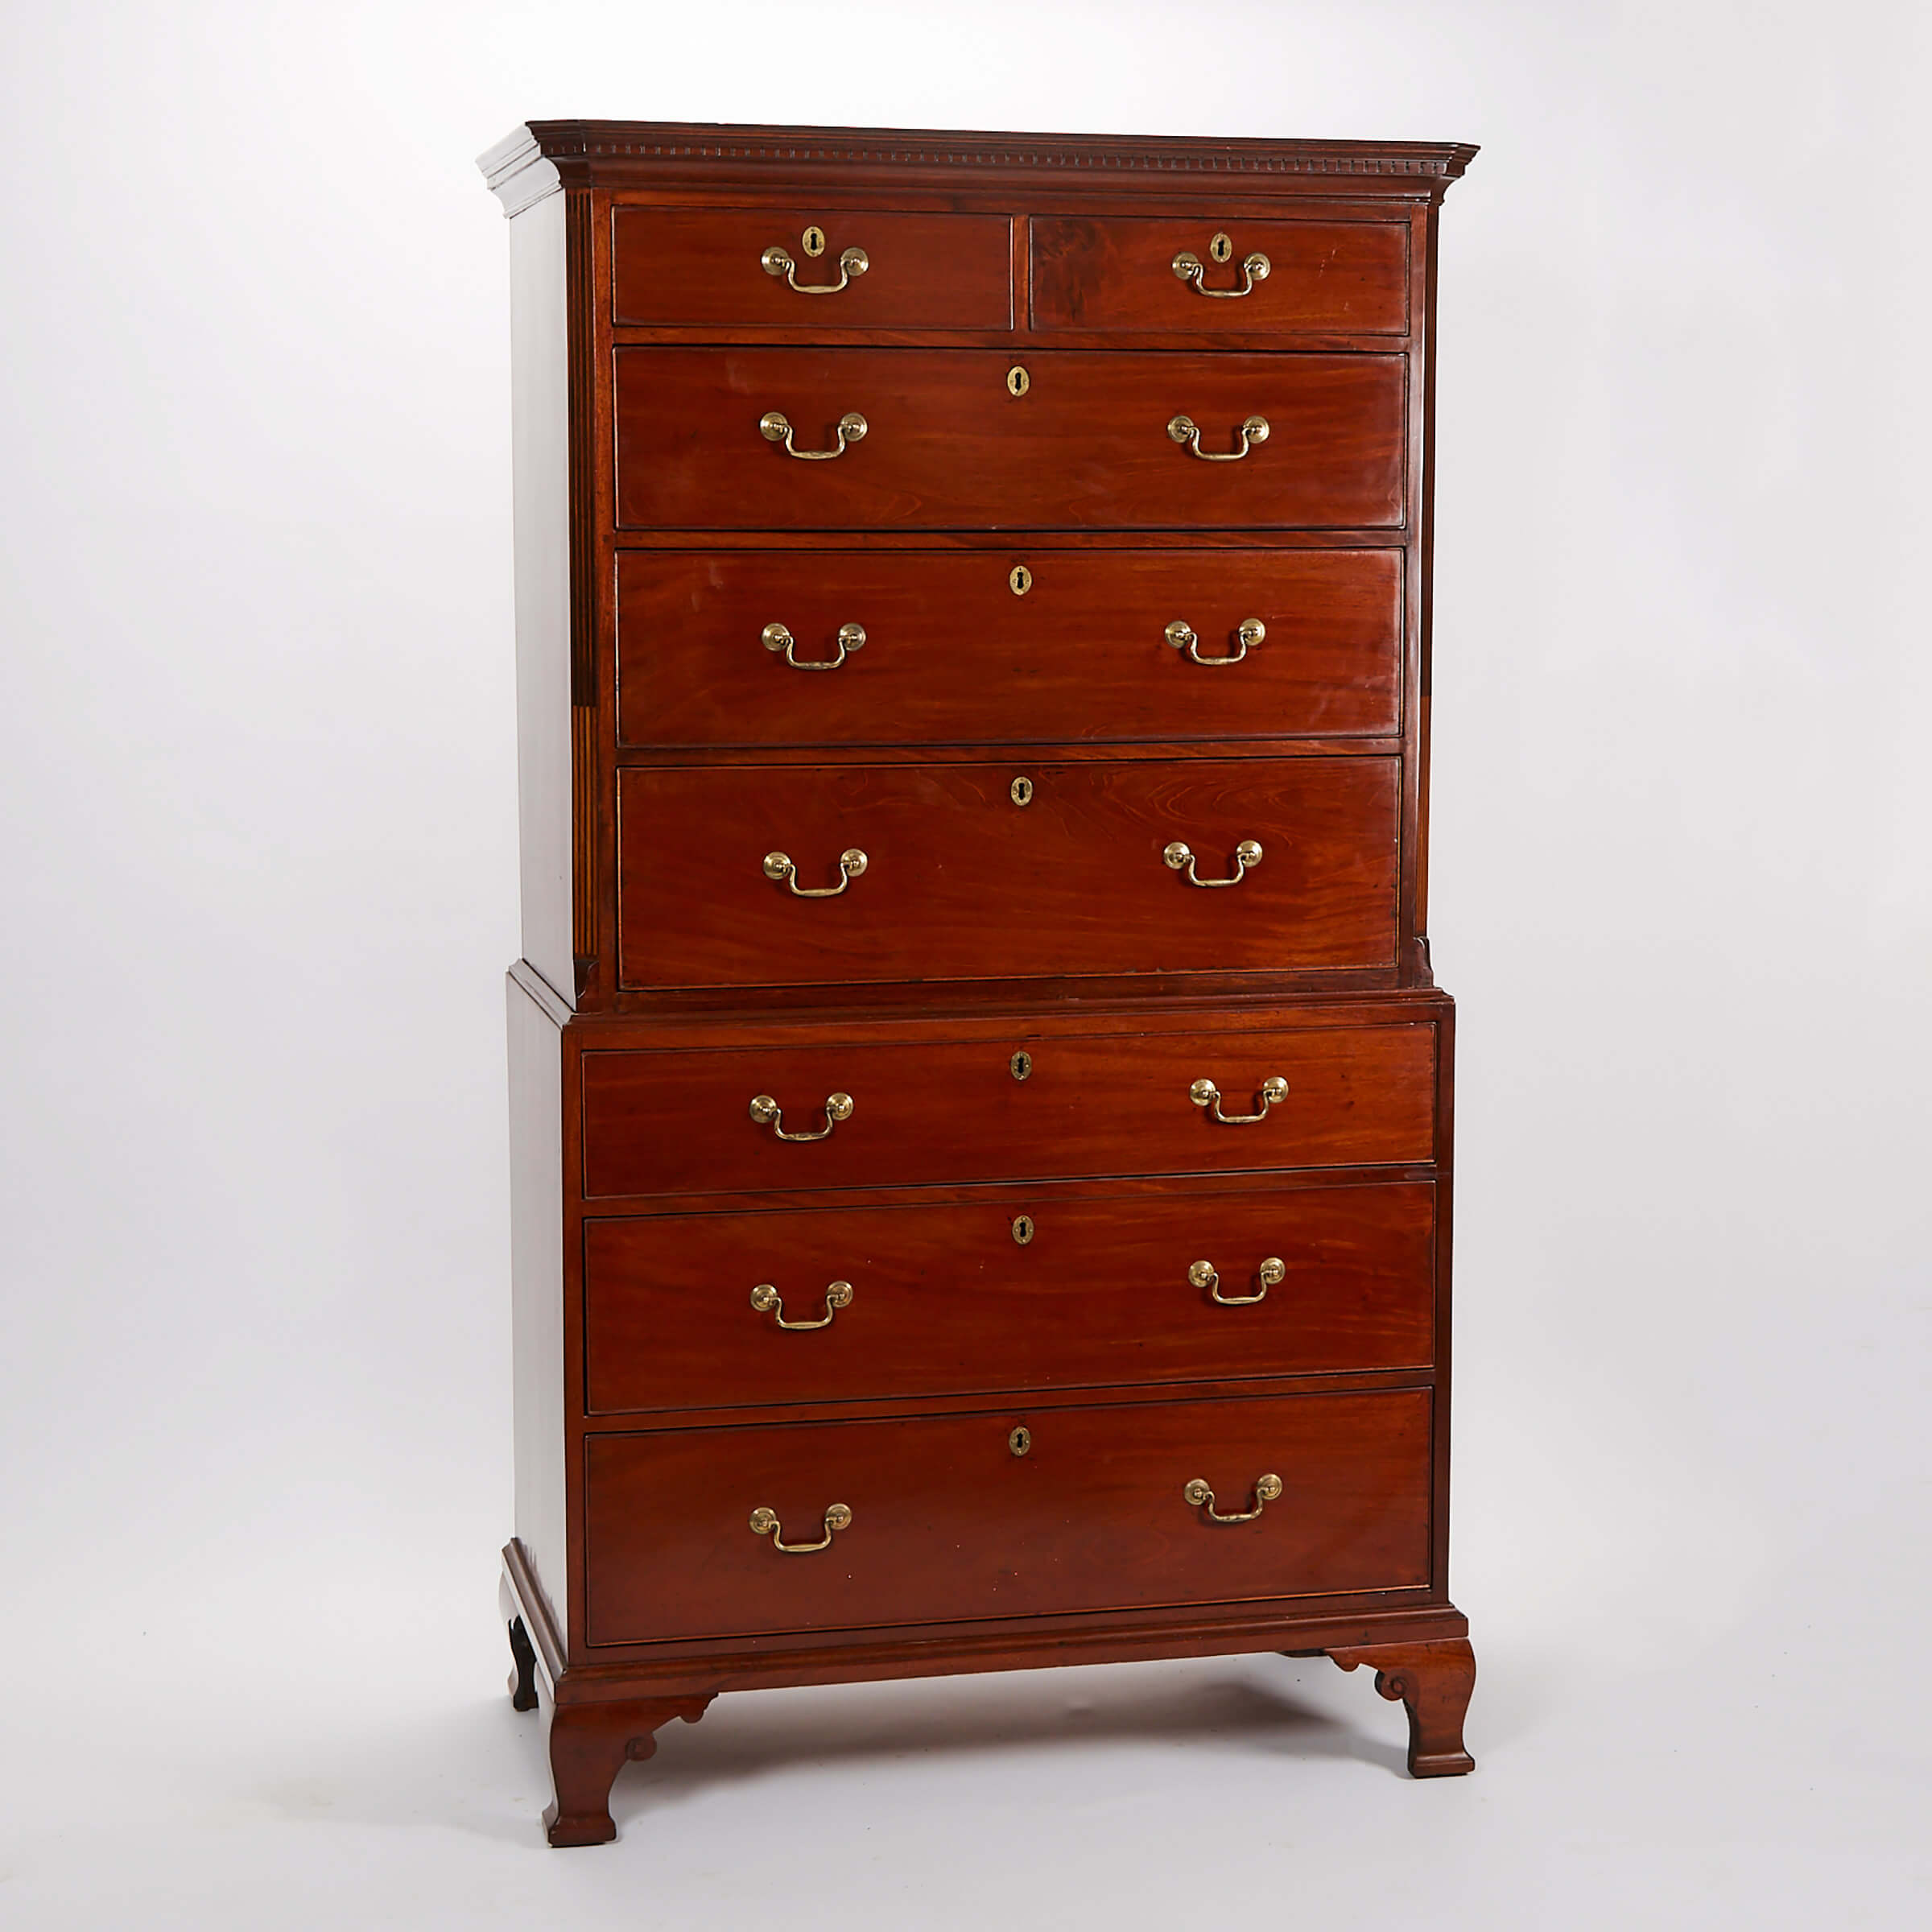 American Mahogany Chest-on-Chest, late 18th century